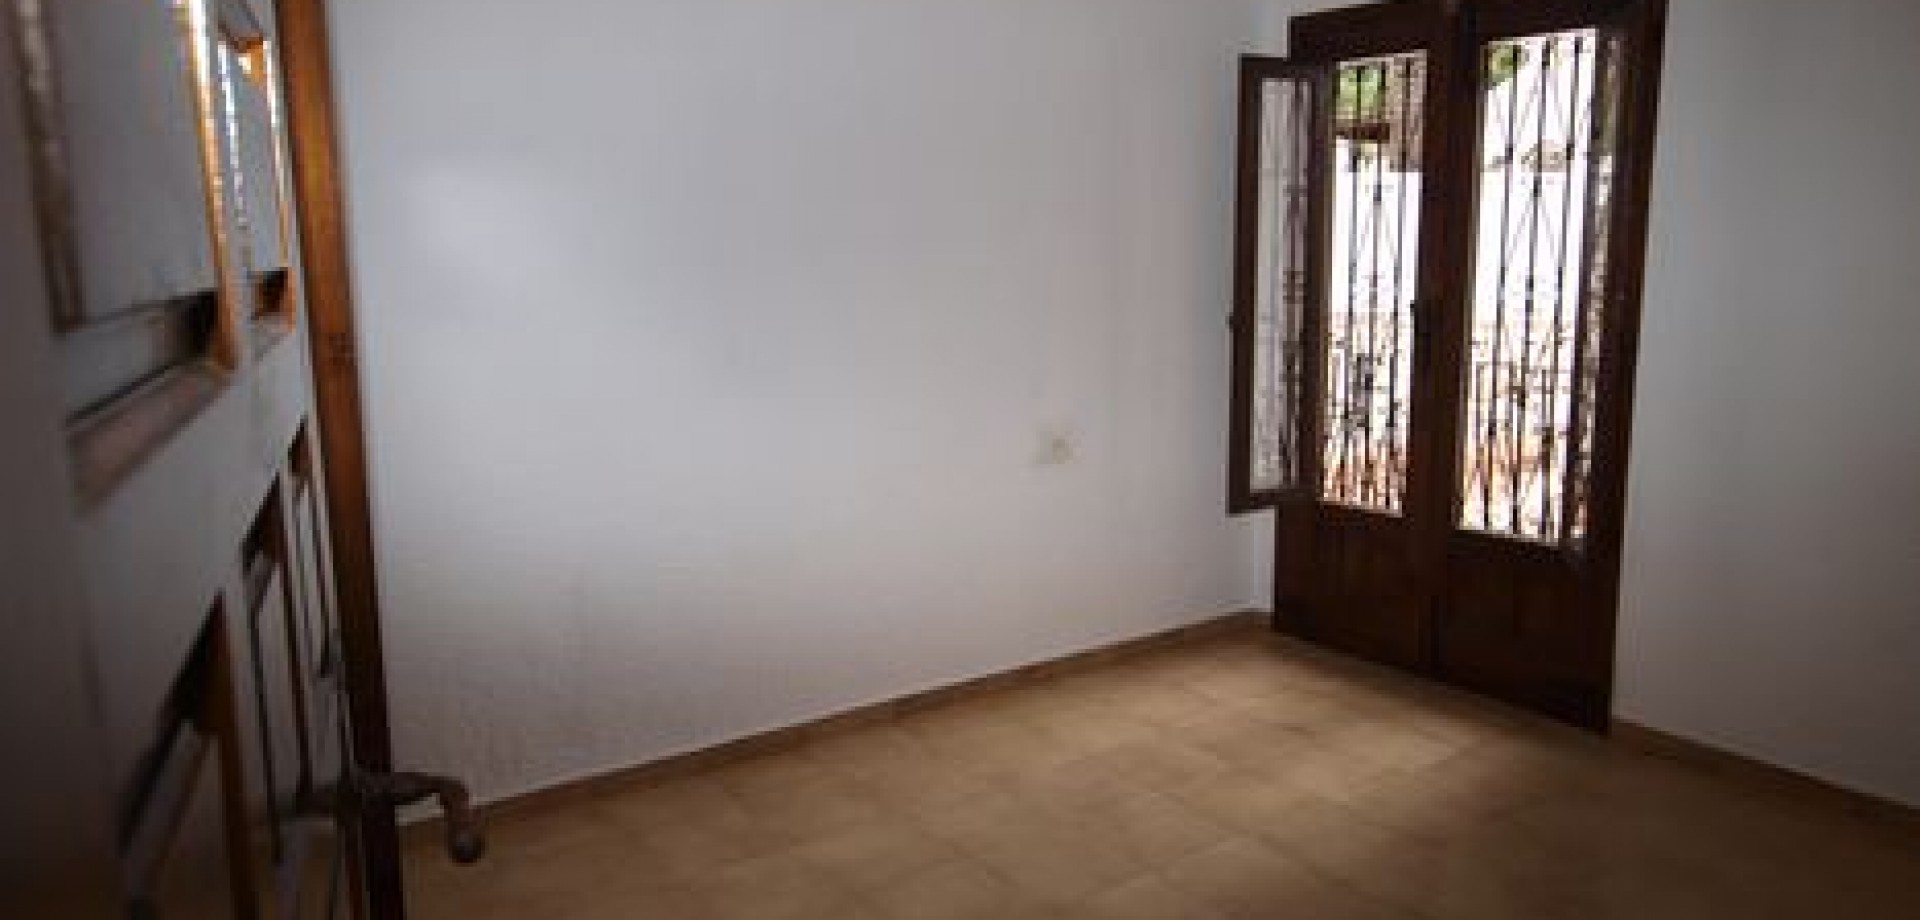 Sale - Commercial Property - Moraira